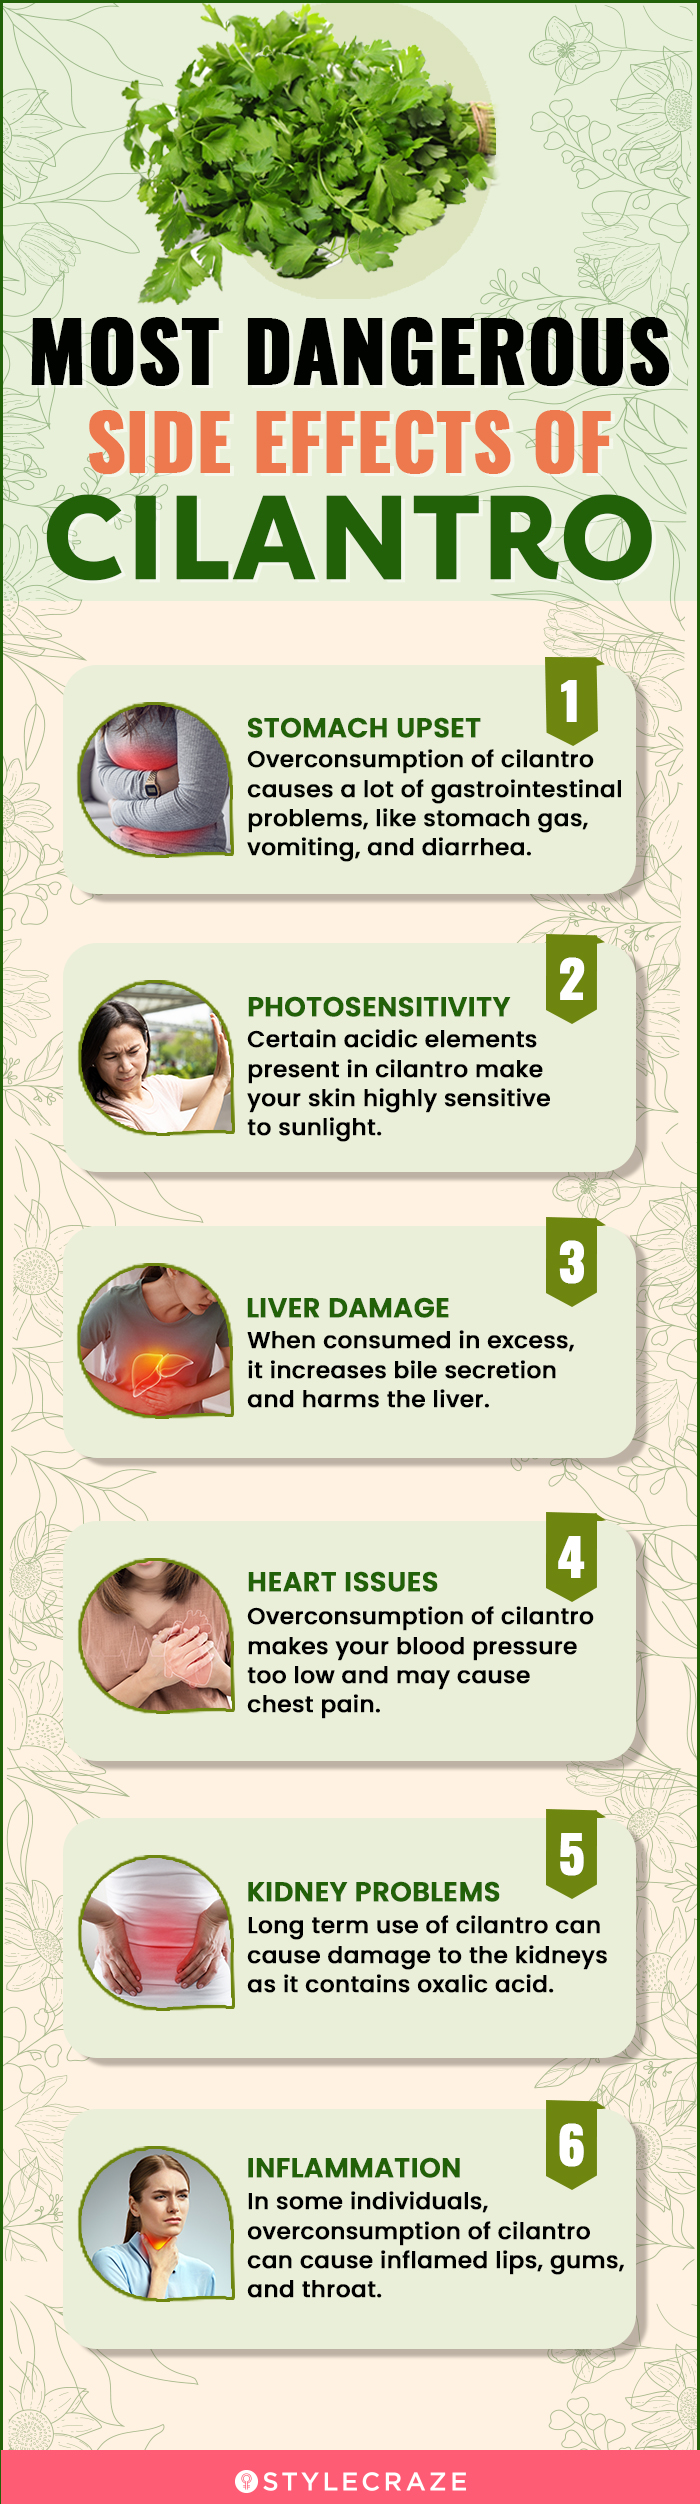 most dangerous side effects of cilantro [infographic]